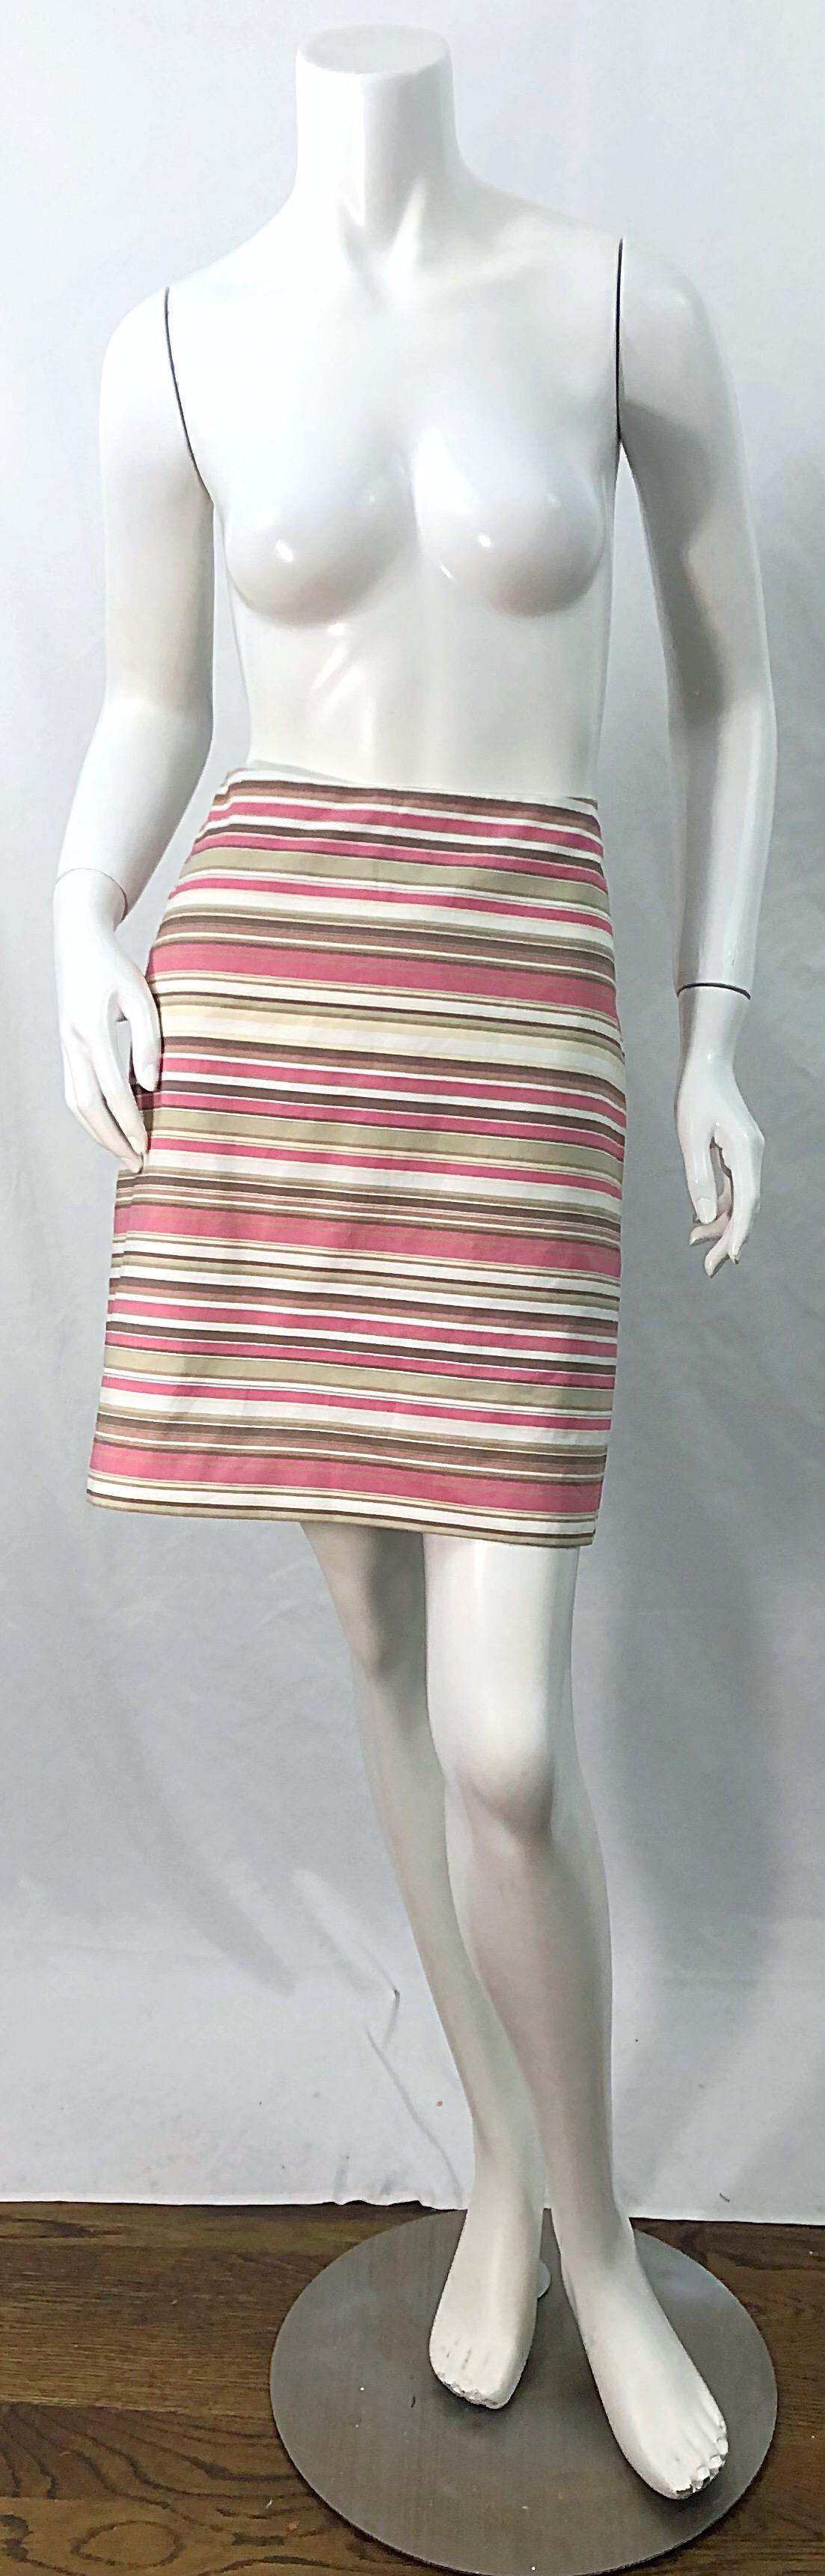 Chic early 2000s MICHAEL KORS COLLECTION Size 12 striped cotton skirt ! Features pretty colors of pink, brown, tan and white throughout. Hidden zipper up the side with hook-and-eye closure. The perfect skirt for spring and summer ! 
In great unworn